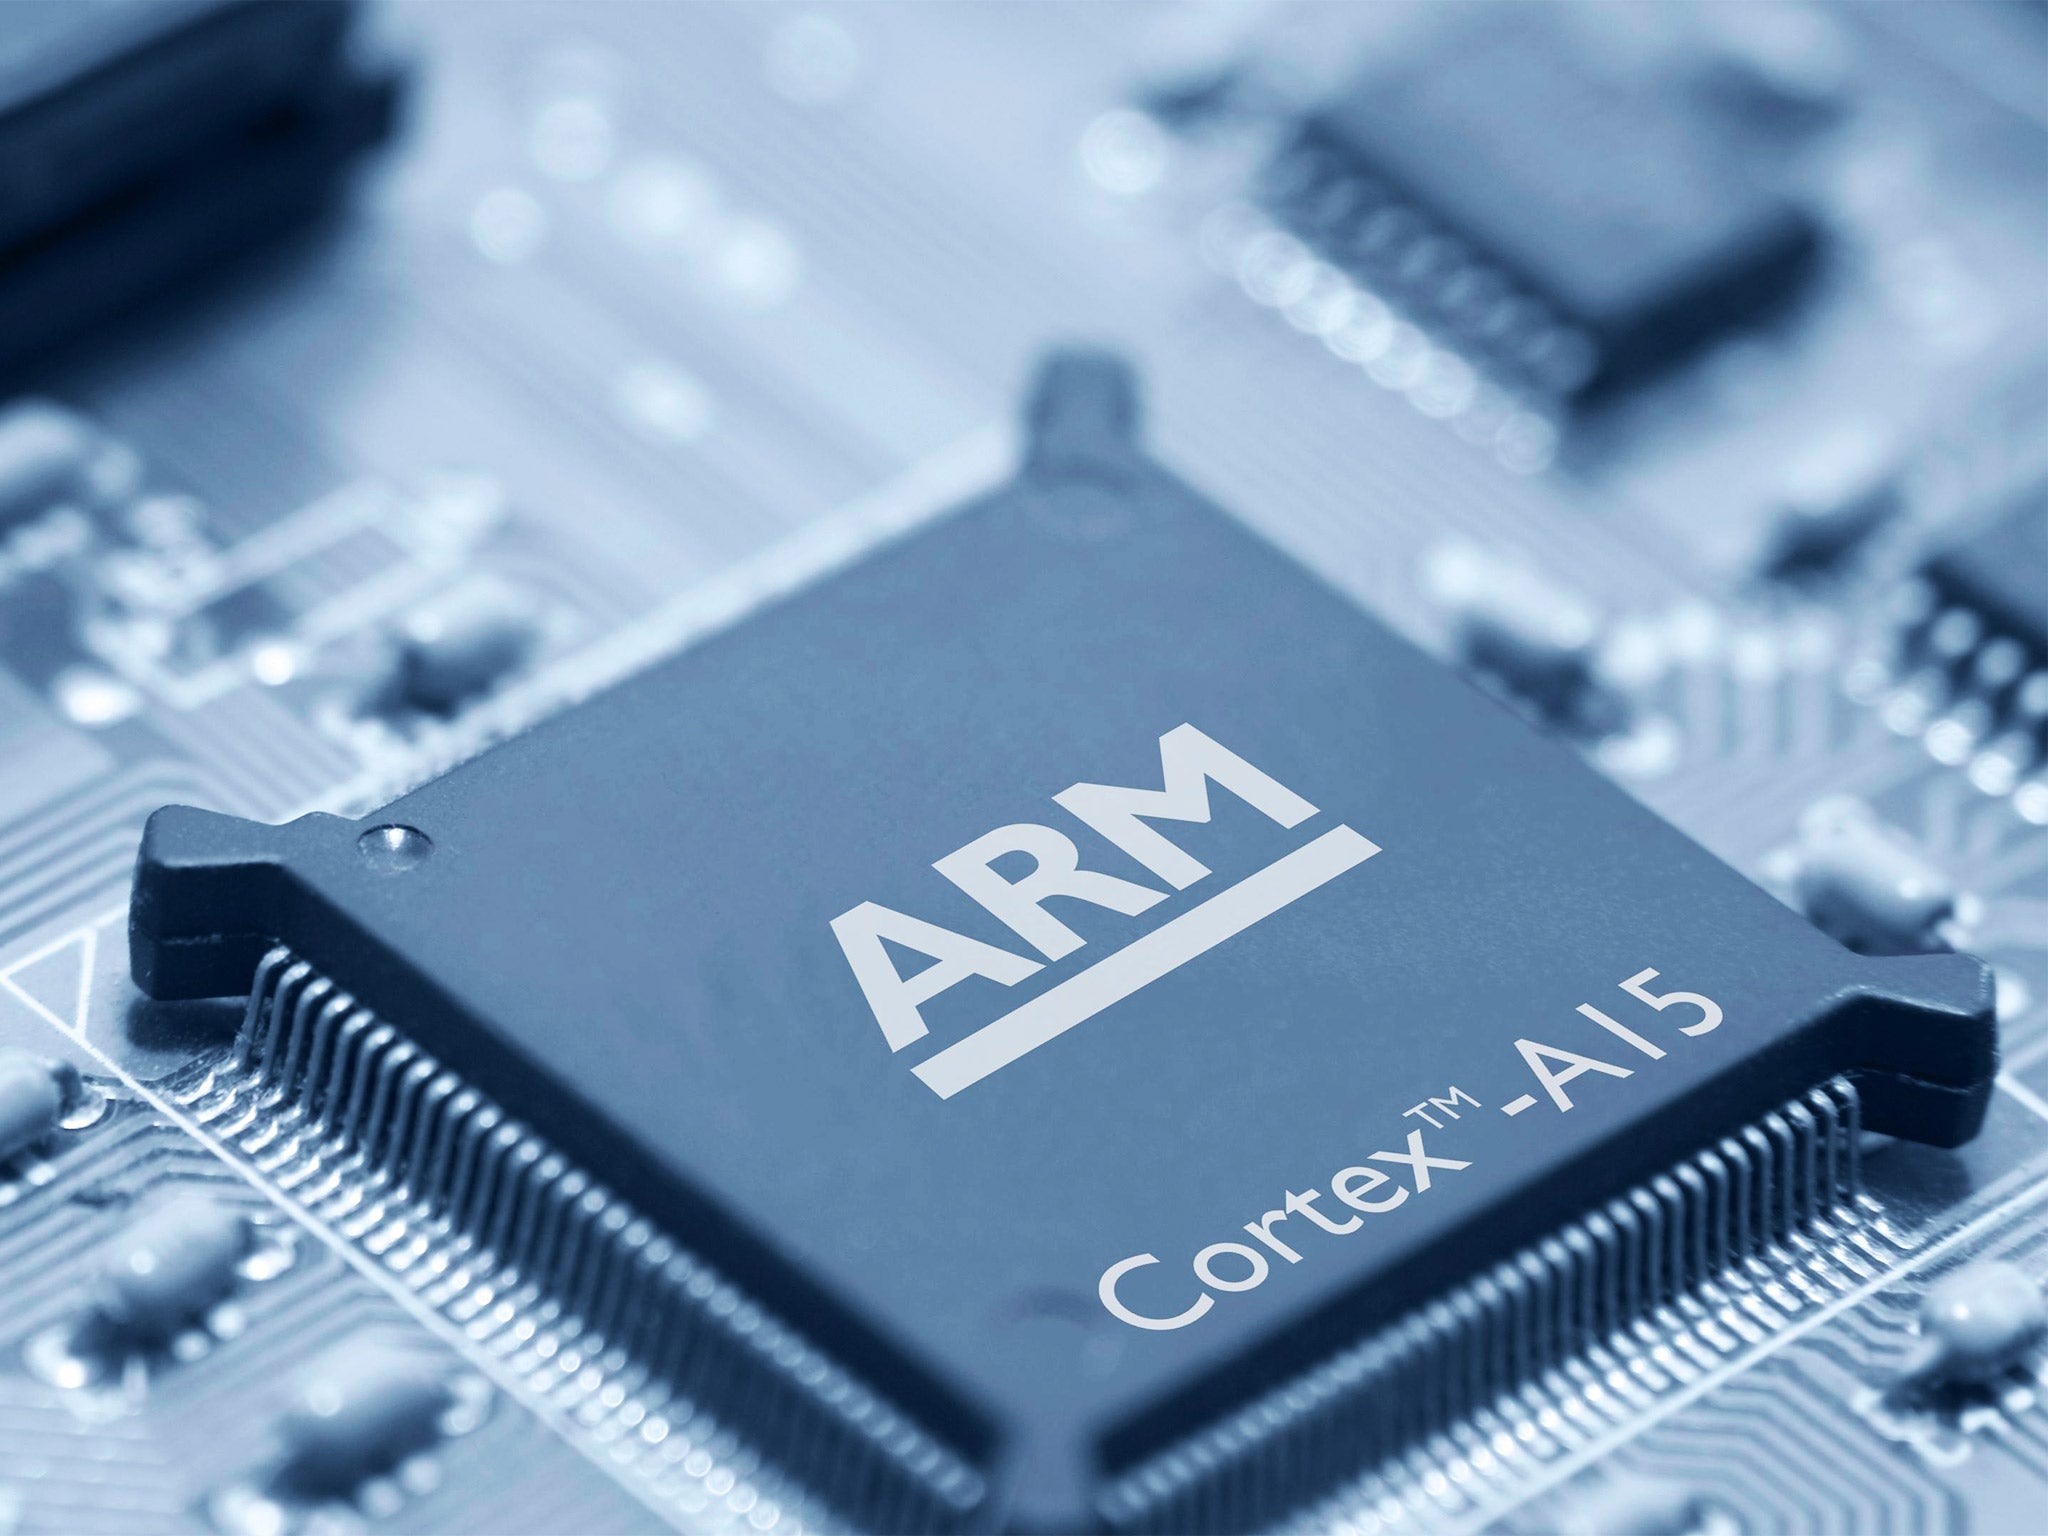 Arm’s chips will be used in everything from PCs to driverless cars